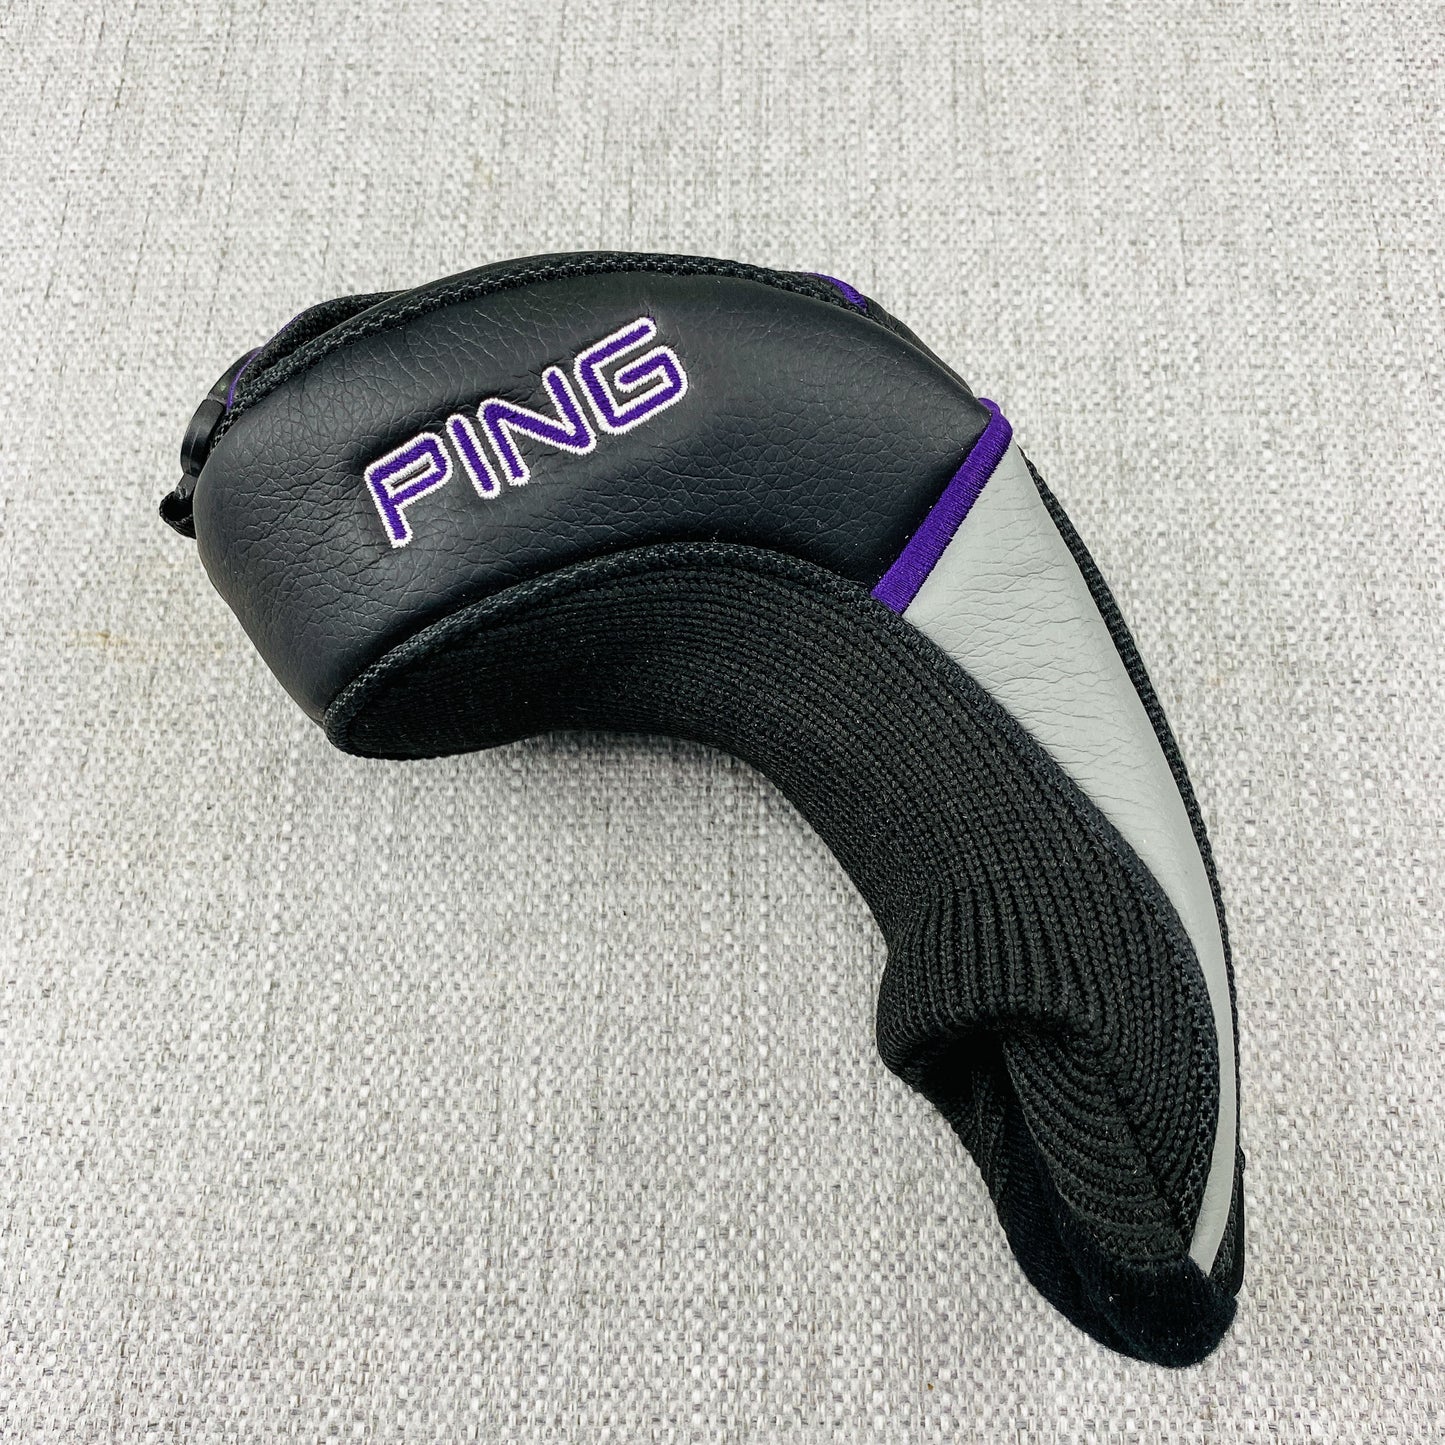 PING Serene Ladies Hybrid Cover. As New